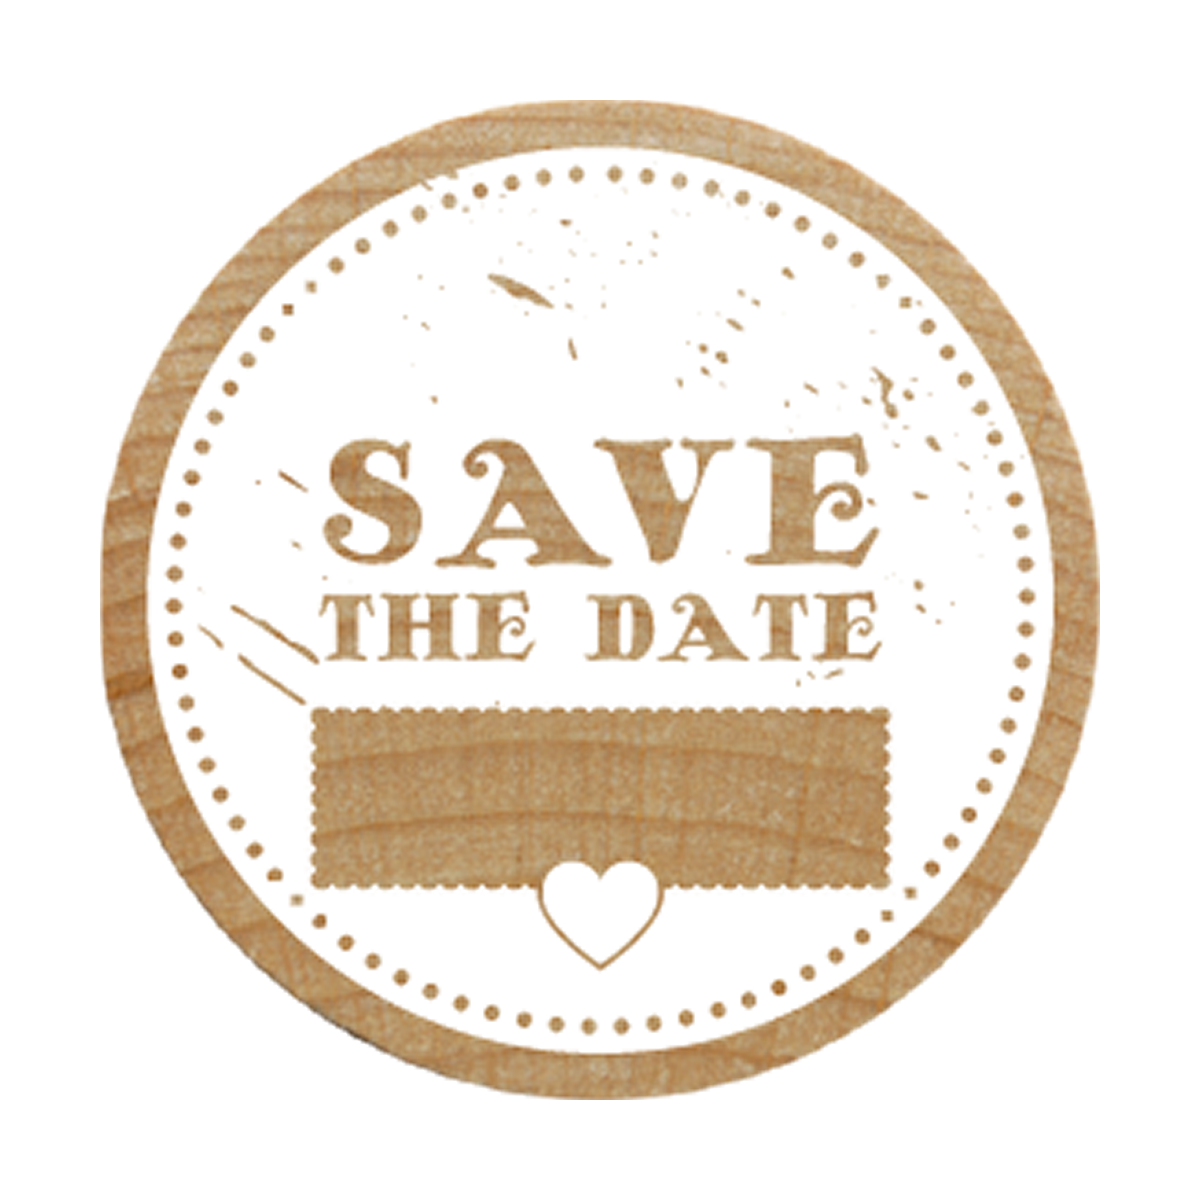 COLOPCOLOP Arts & Crafts Woodies Ξύλινη Σφραγίδα - Save the date 1